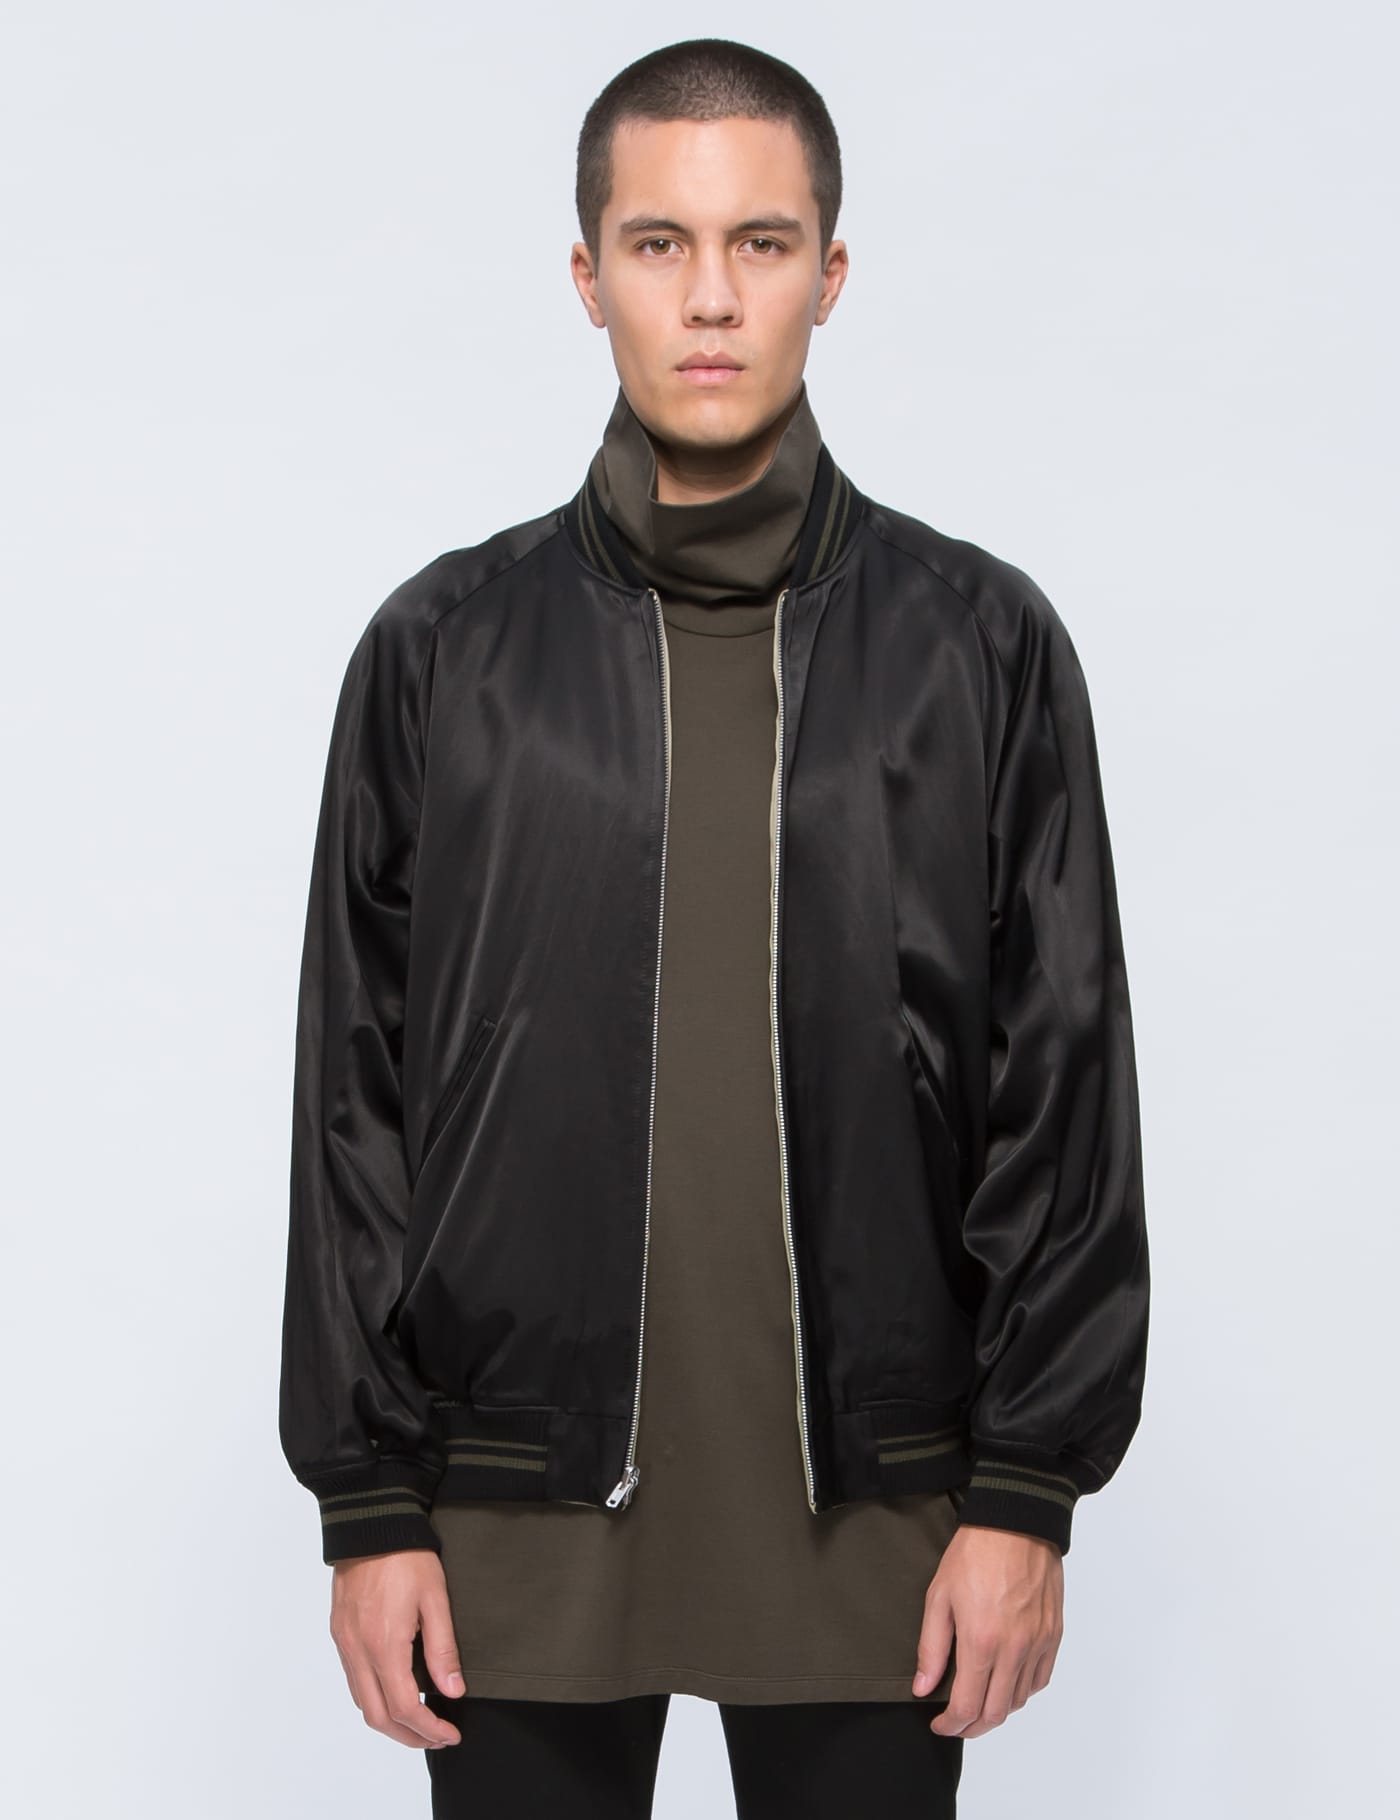 LAD MUSICIAN - Reversible Bomber Jacket | HBX - Globally Curated